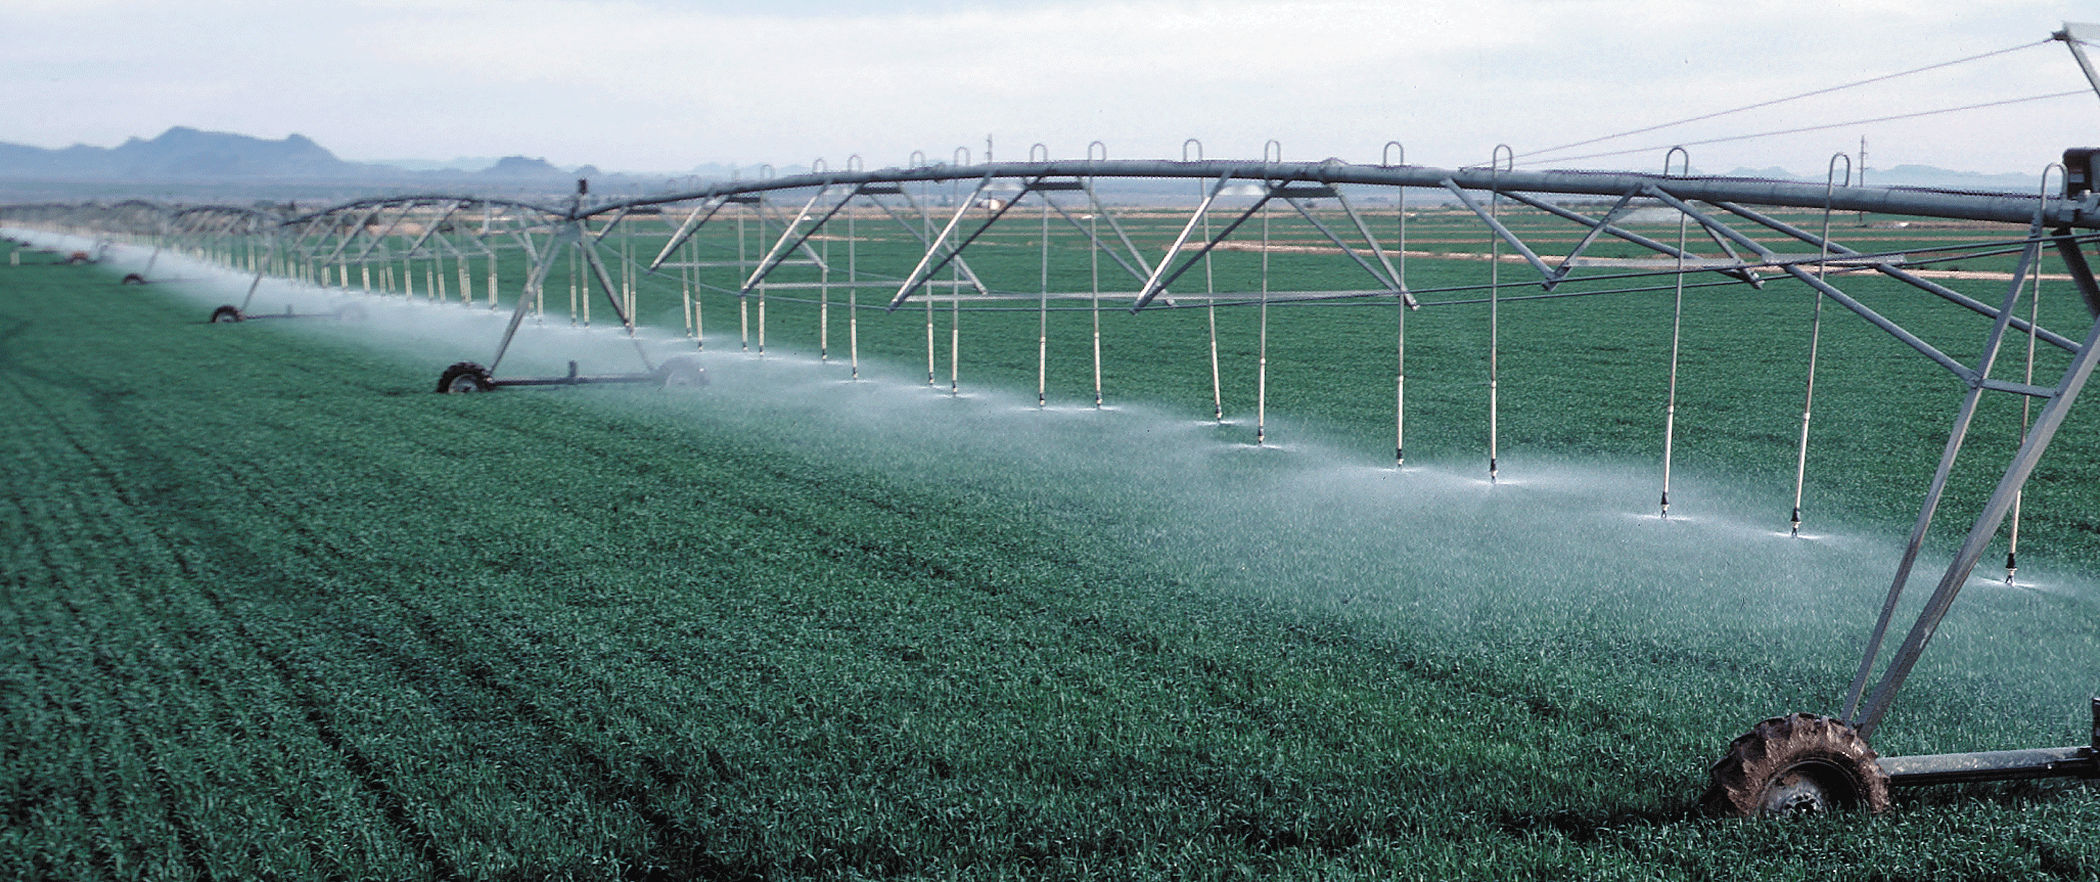 Photograph showing a wheat field being irrigated.